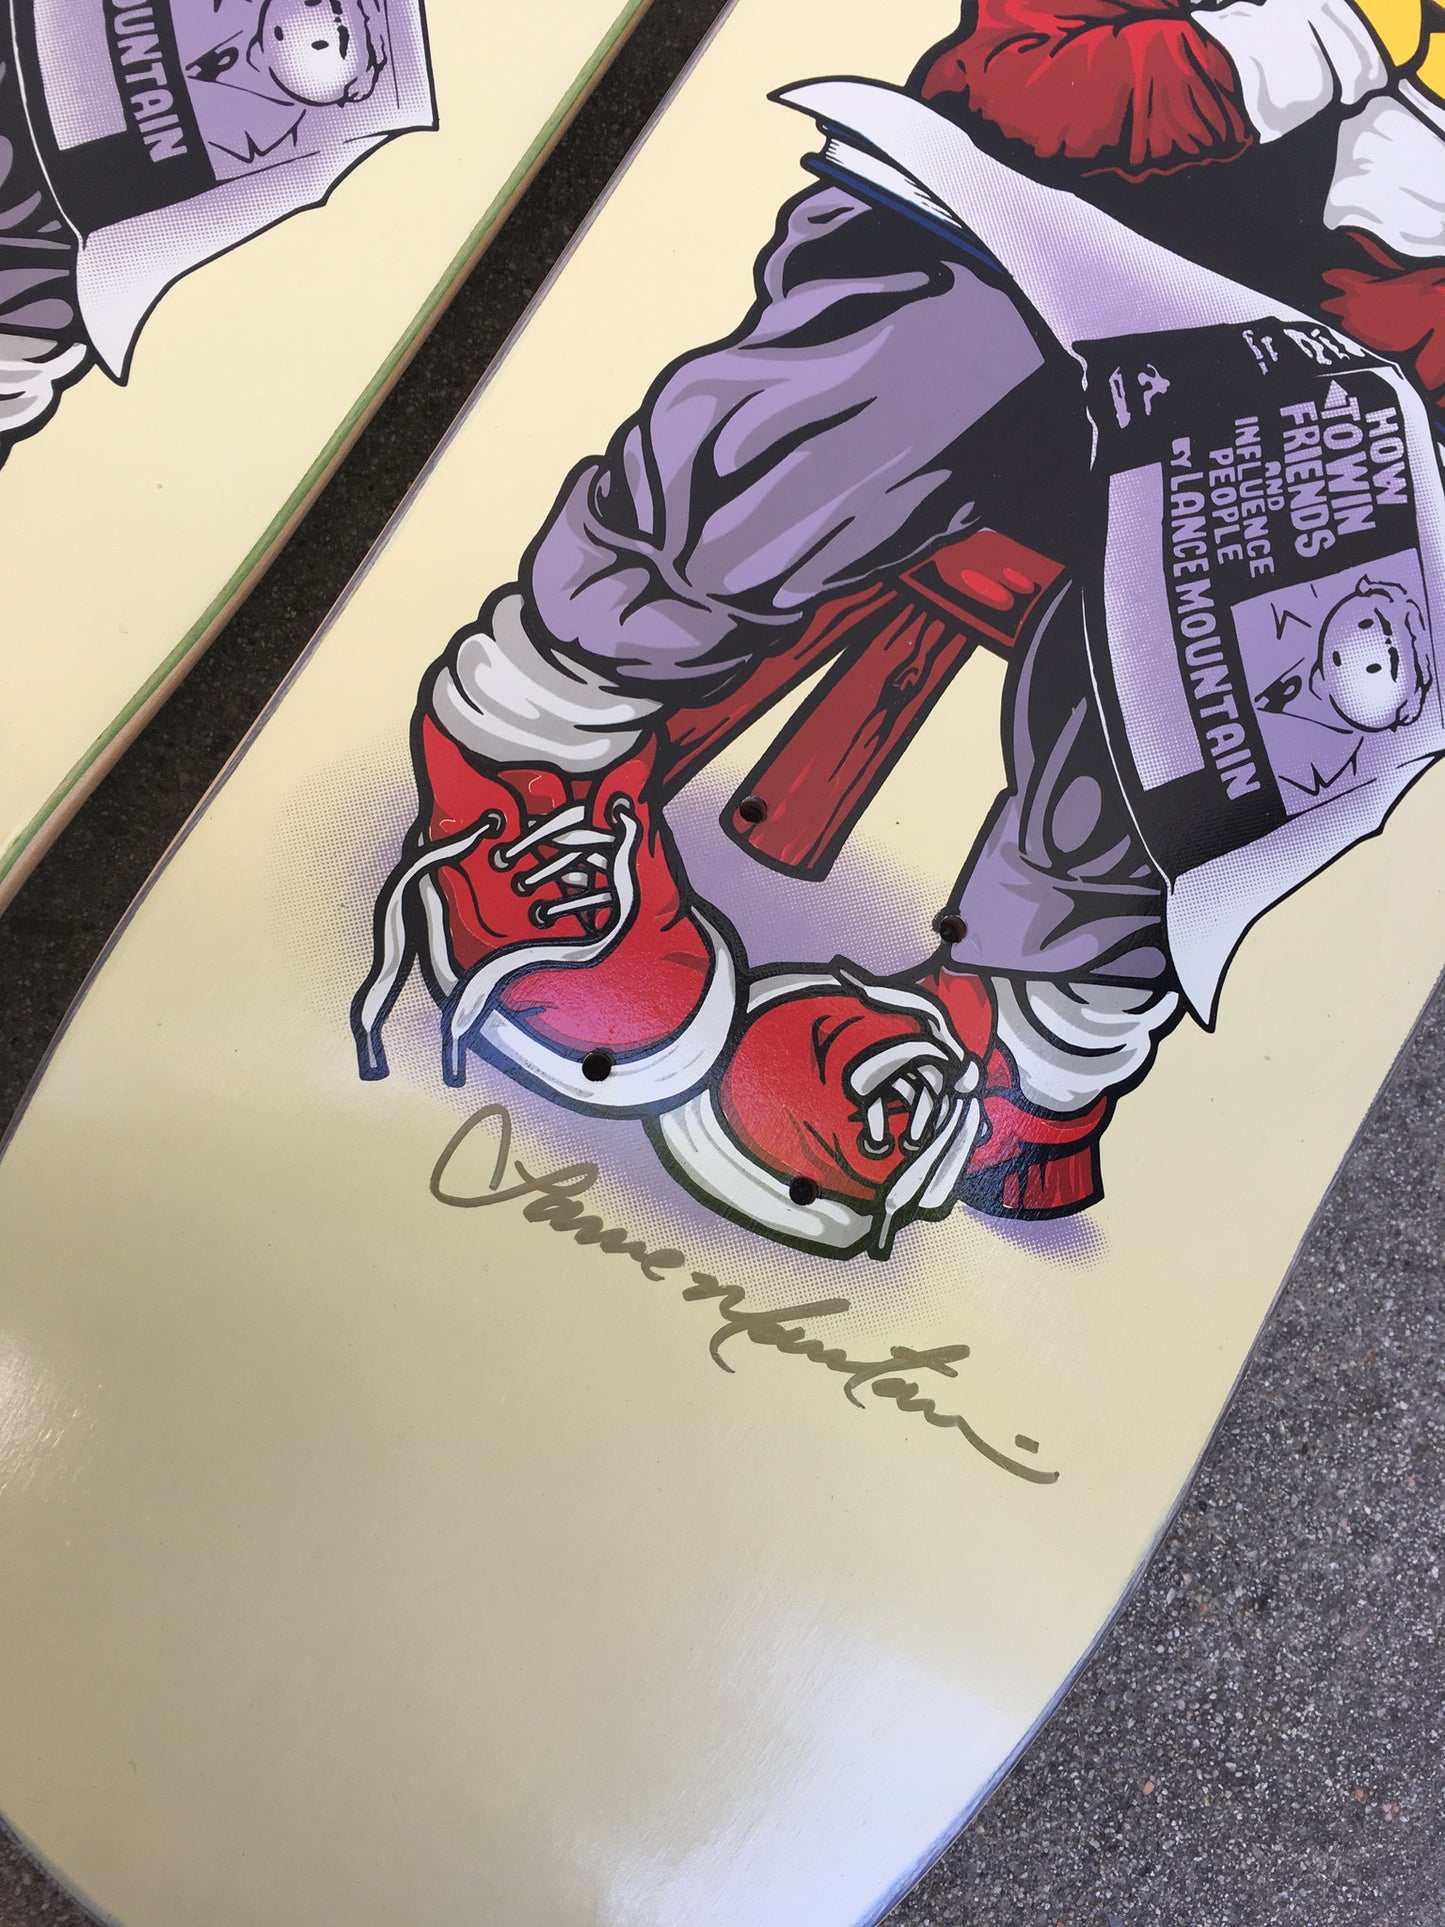 SIGNED BY LANCE jeremy klein hand screened black eye kid board by lance mountain 8.55 X 32.5